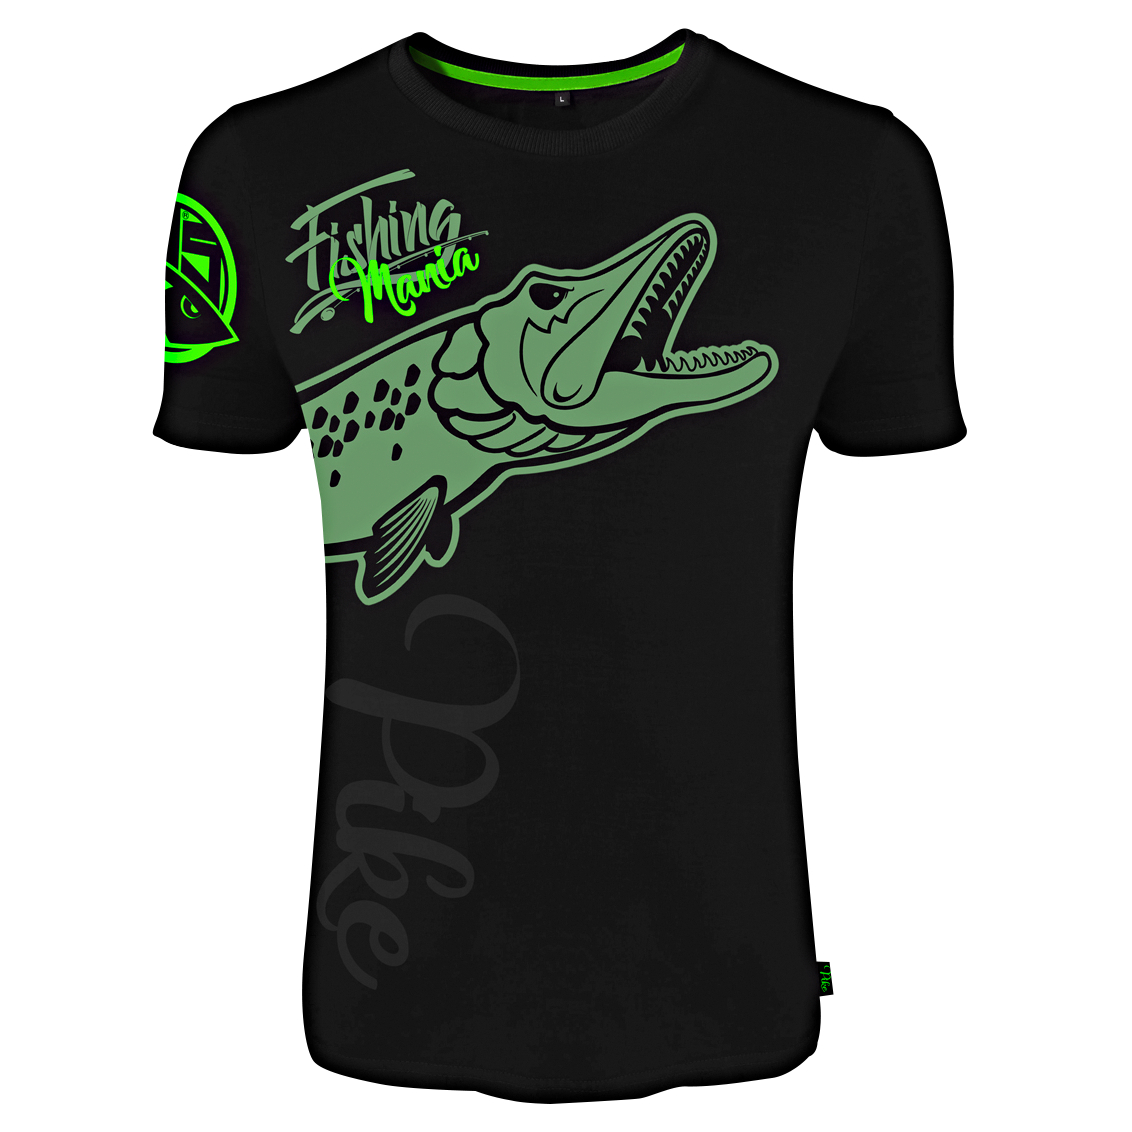 Hotspot Mens T-Shirt Fishing Mania (Pike) at low prices